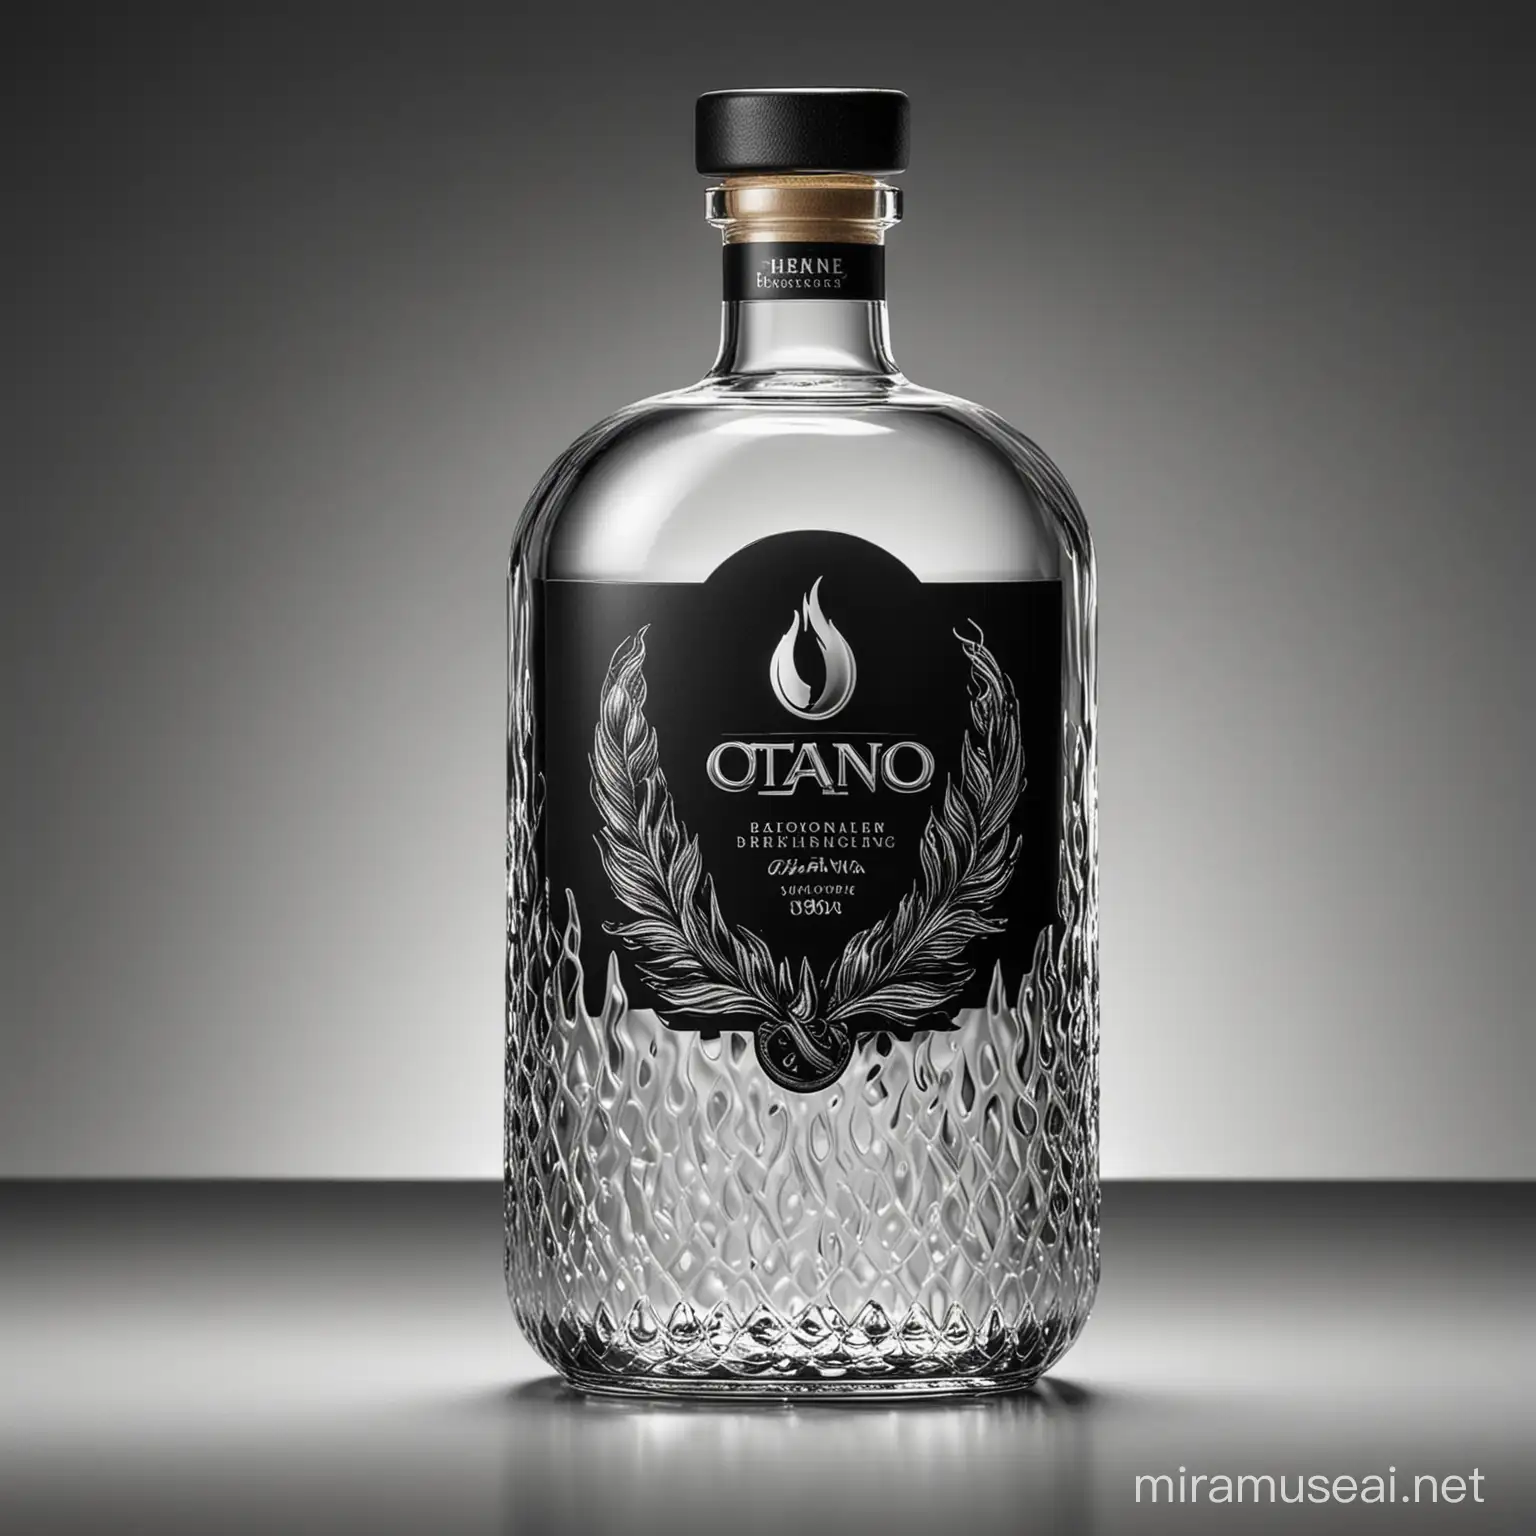 Modern health liquor packaging design, high end liquor, 500 ml glass bottle, photograph images, high details, silver and black  texture, brand name is Octano, brand label flame like shape